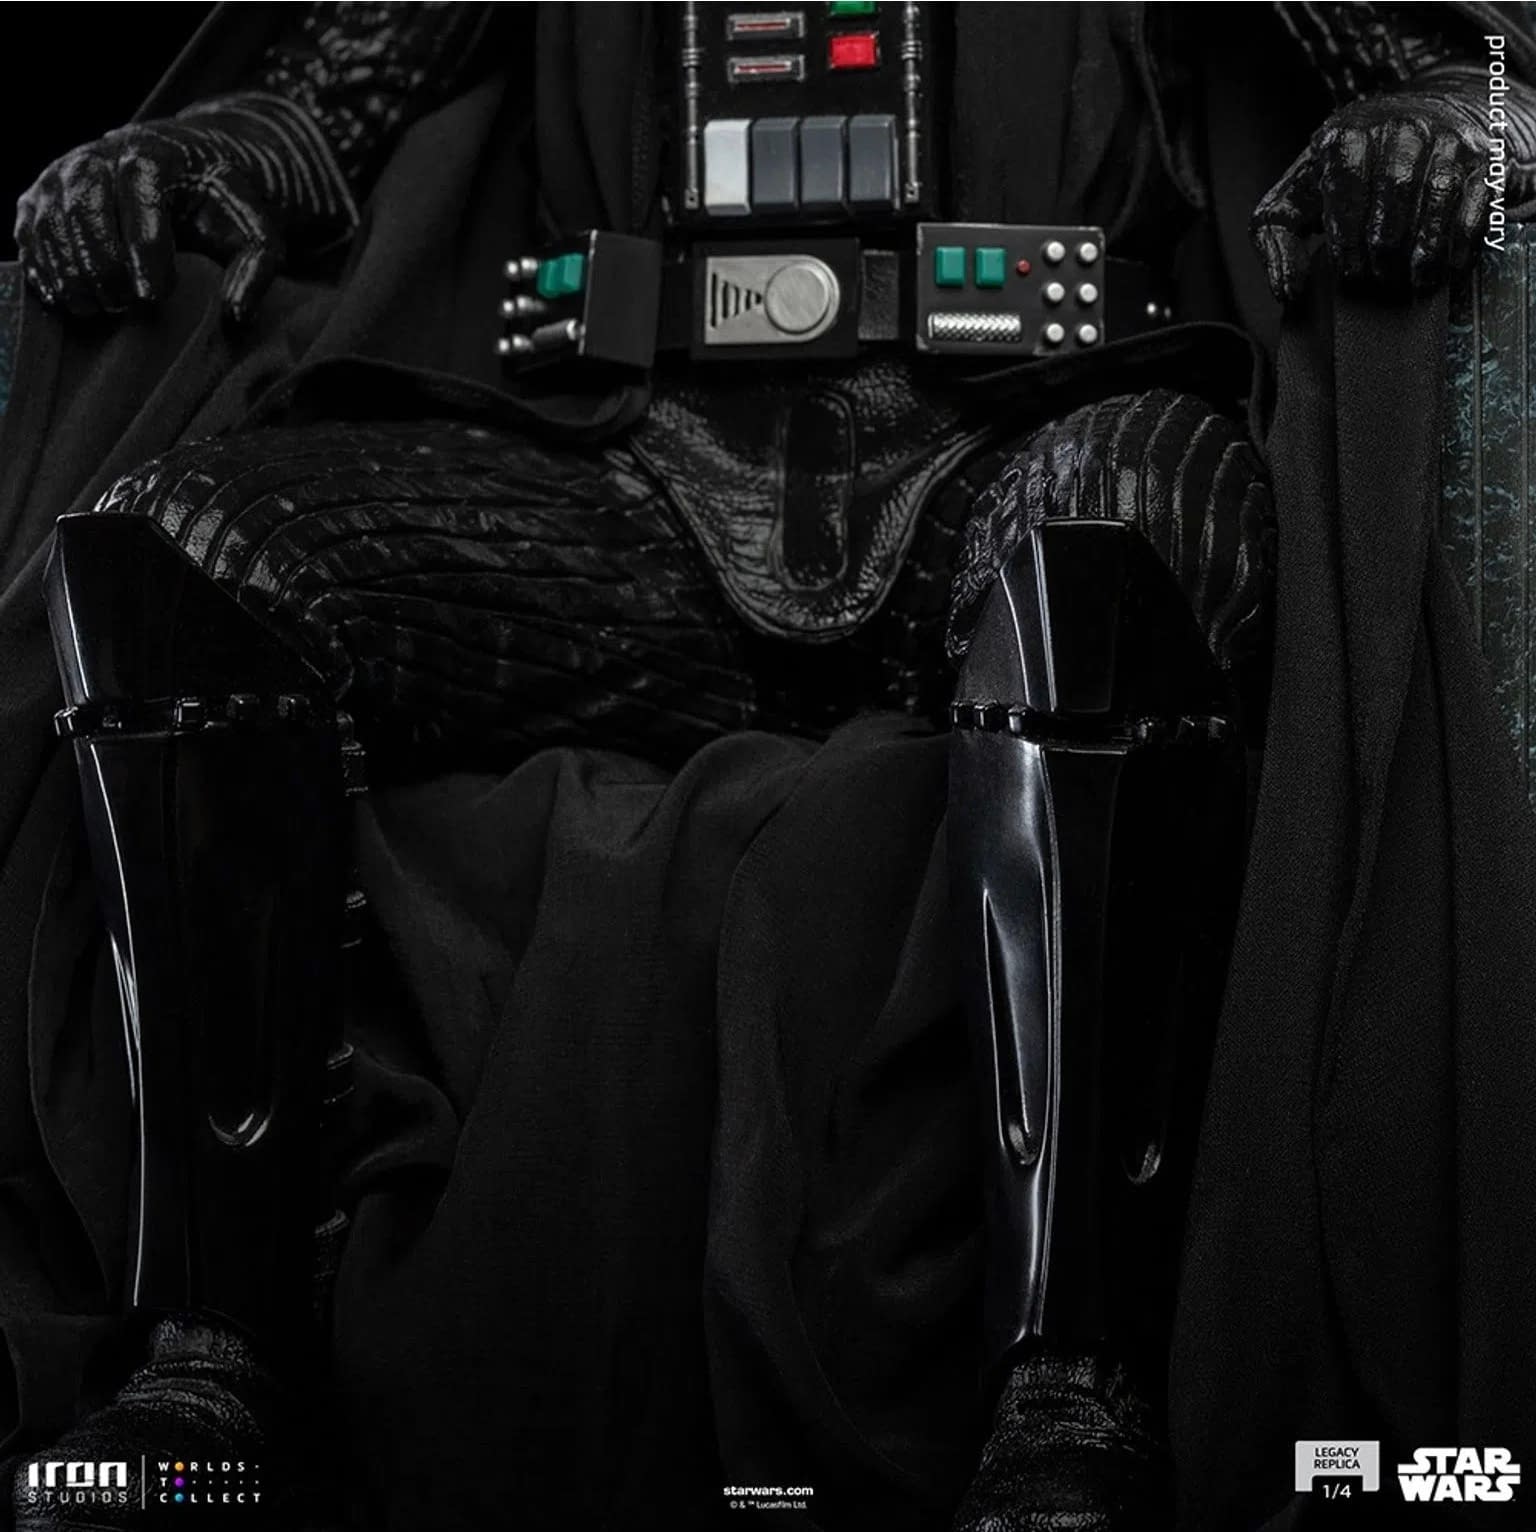 Darth Vader Sits One His Throne with Iron Studios Next Star Wars Statue 